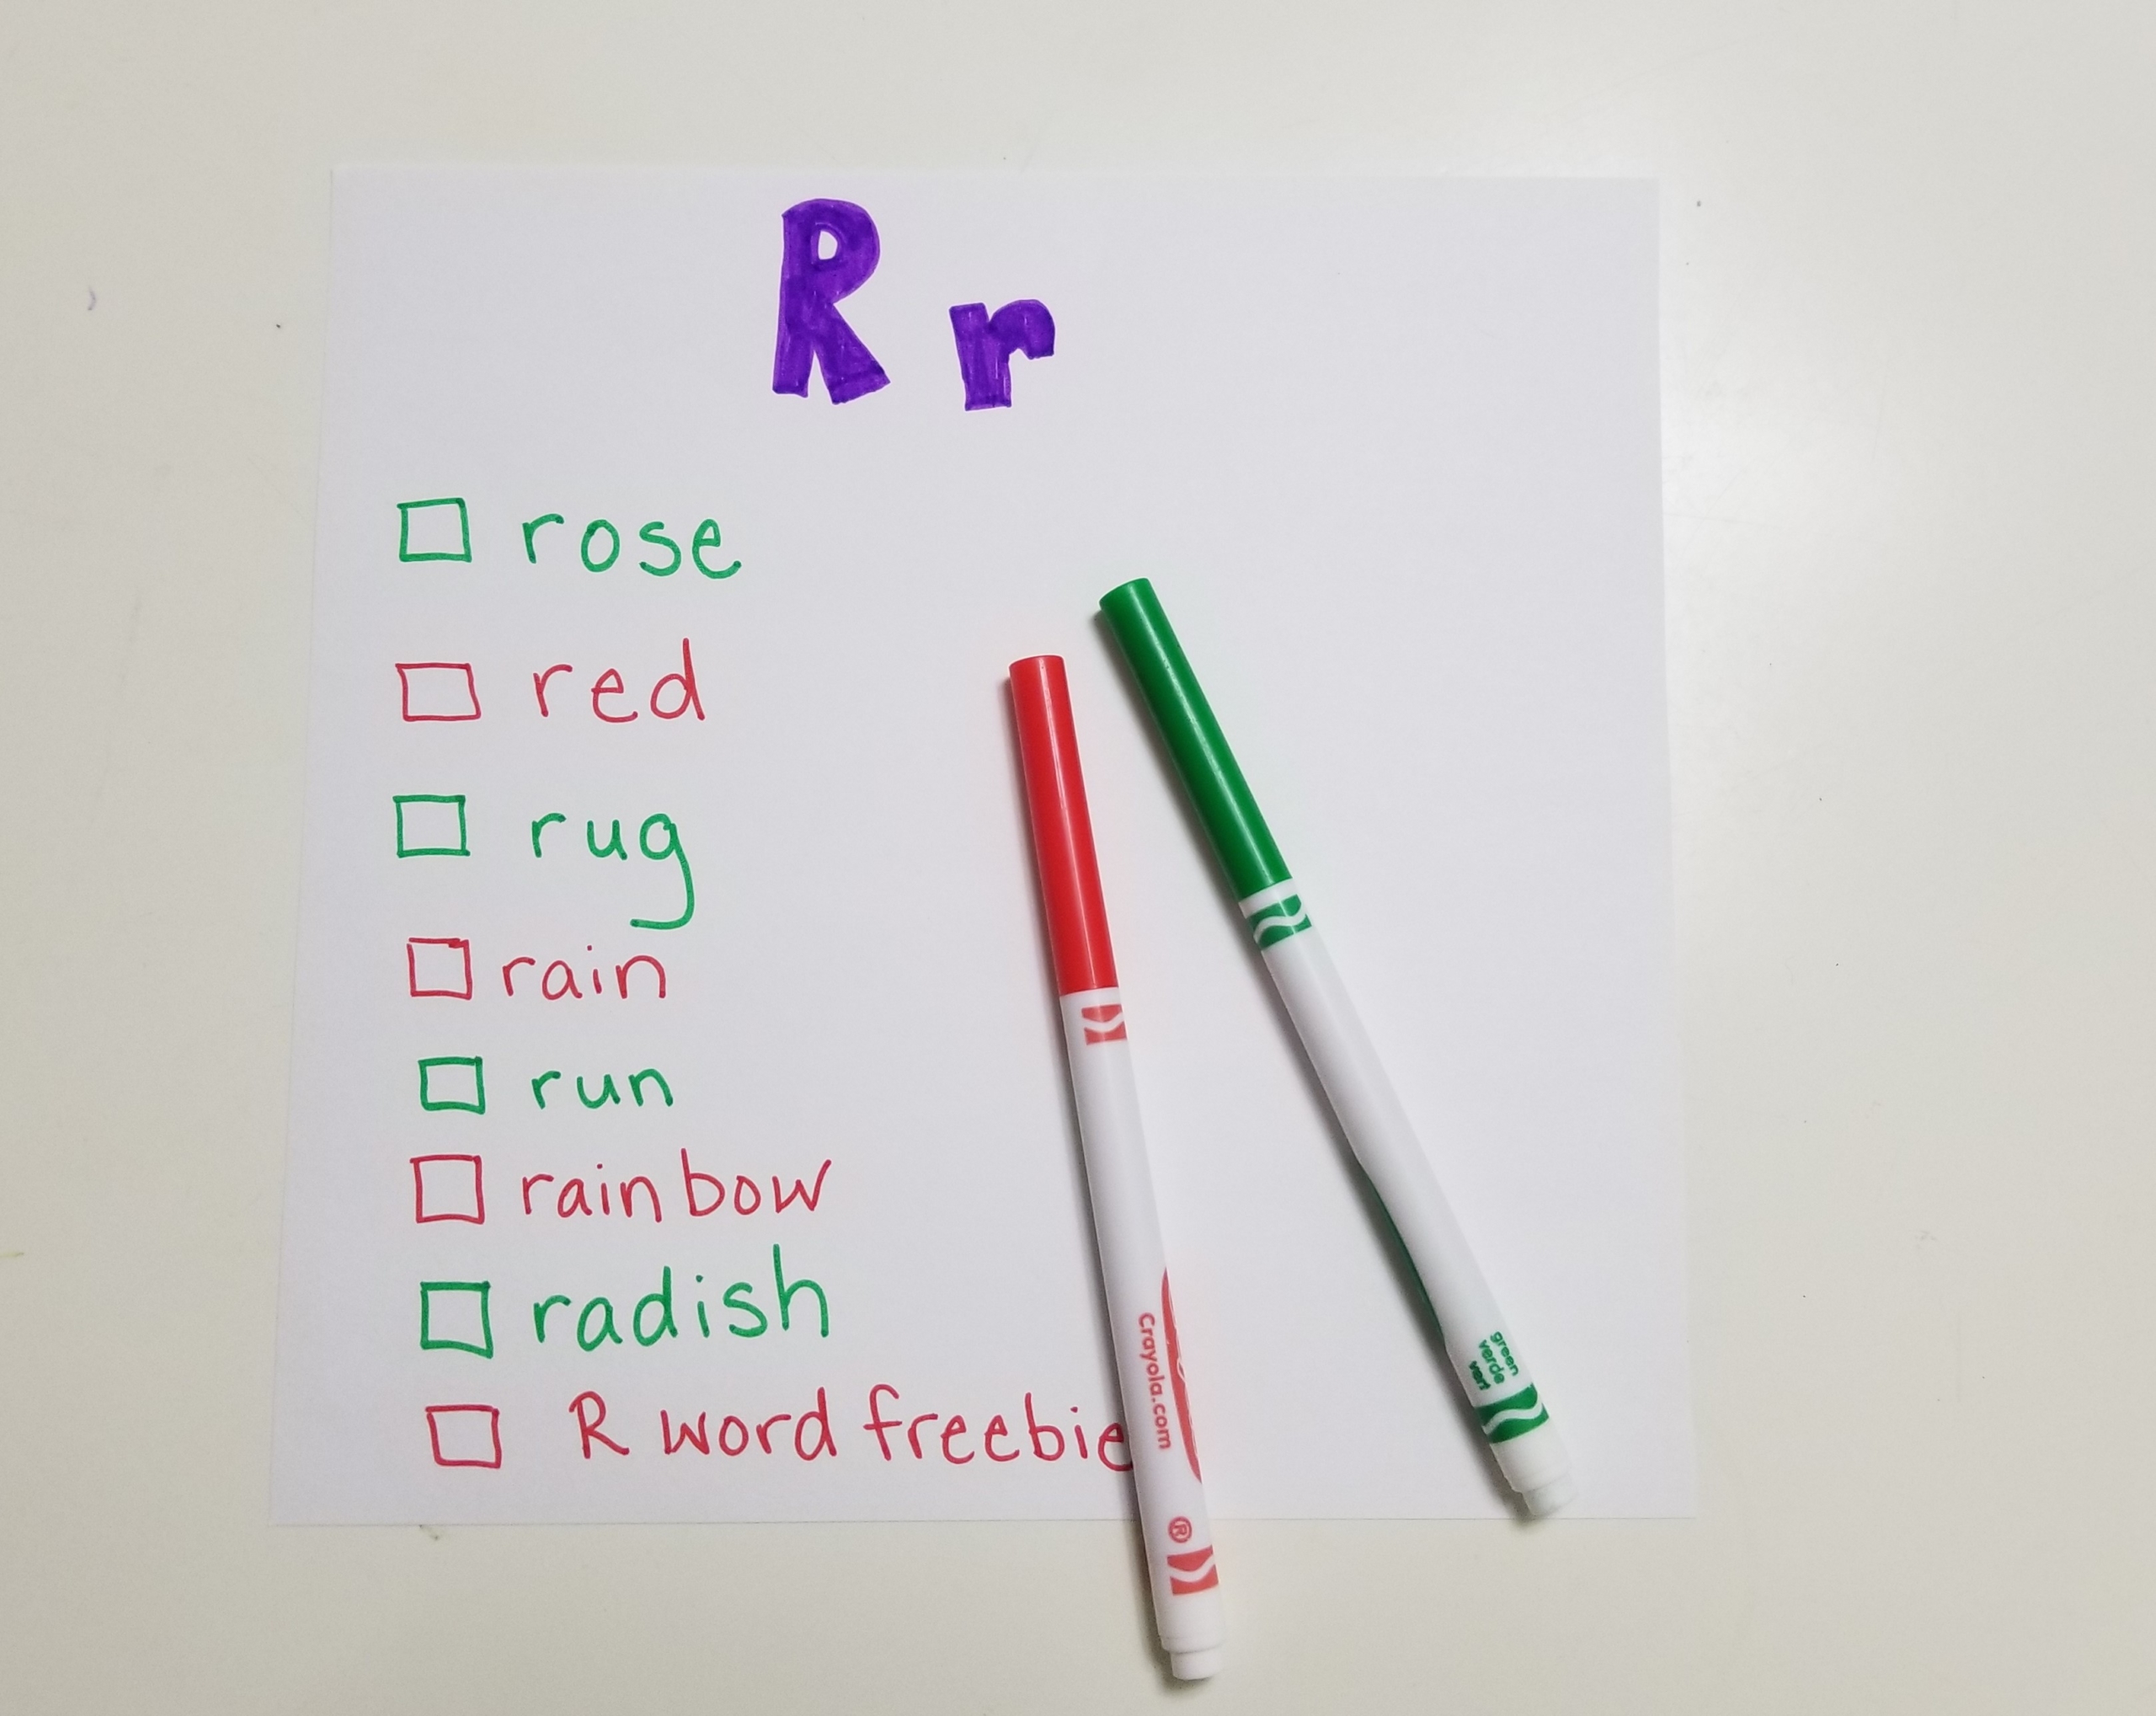 list of words starting with letter R